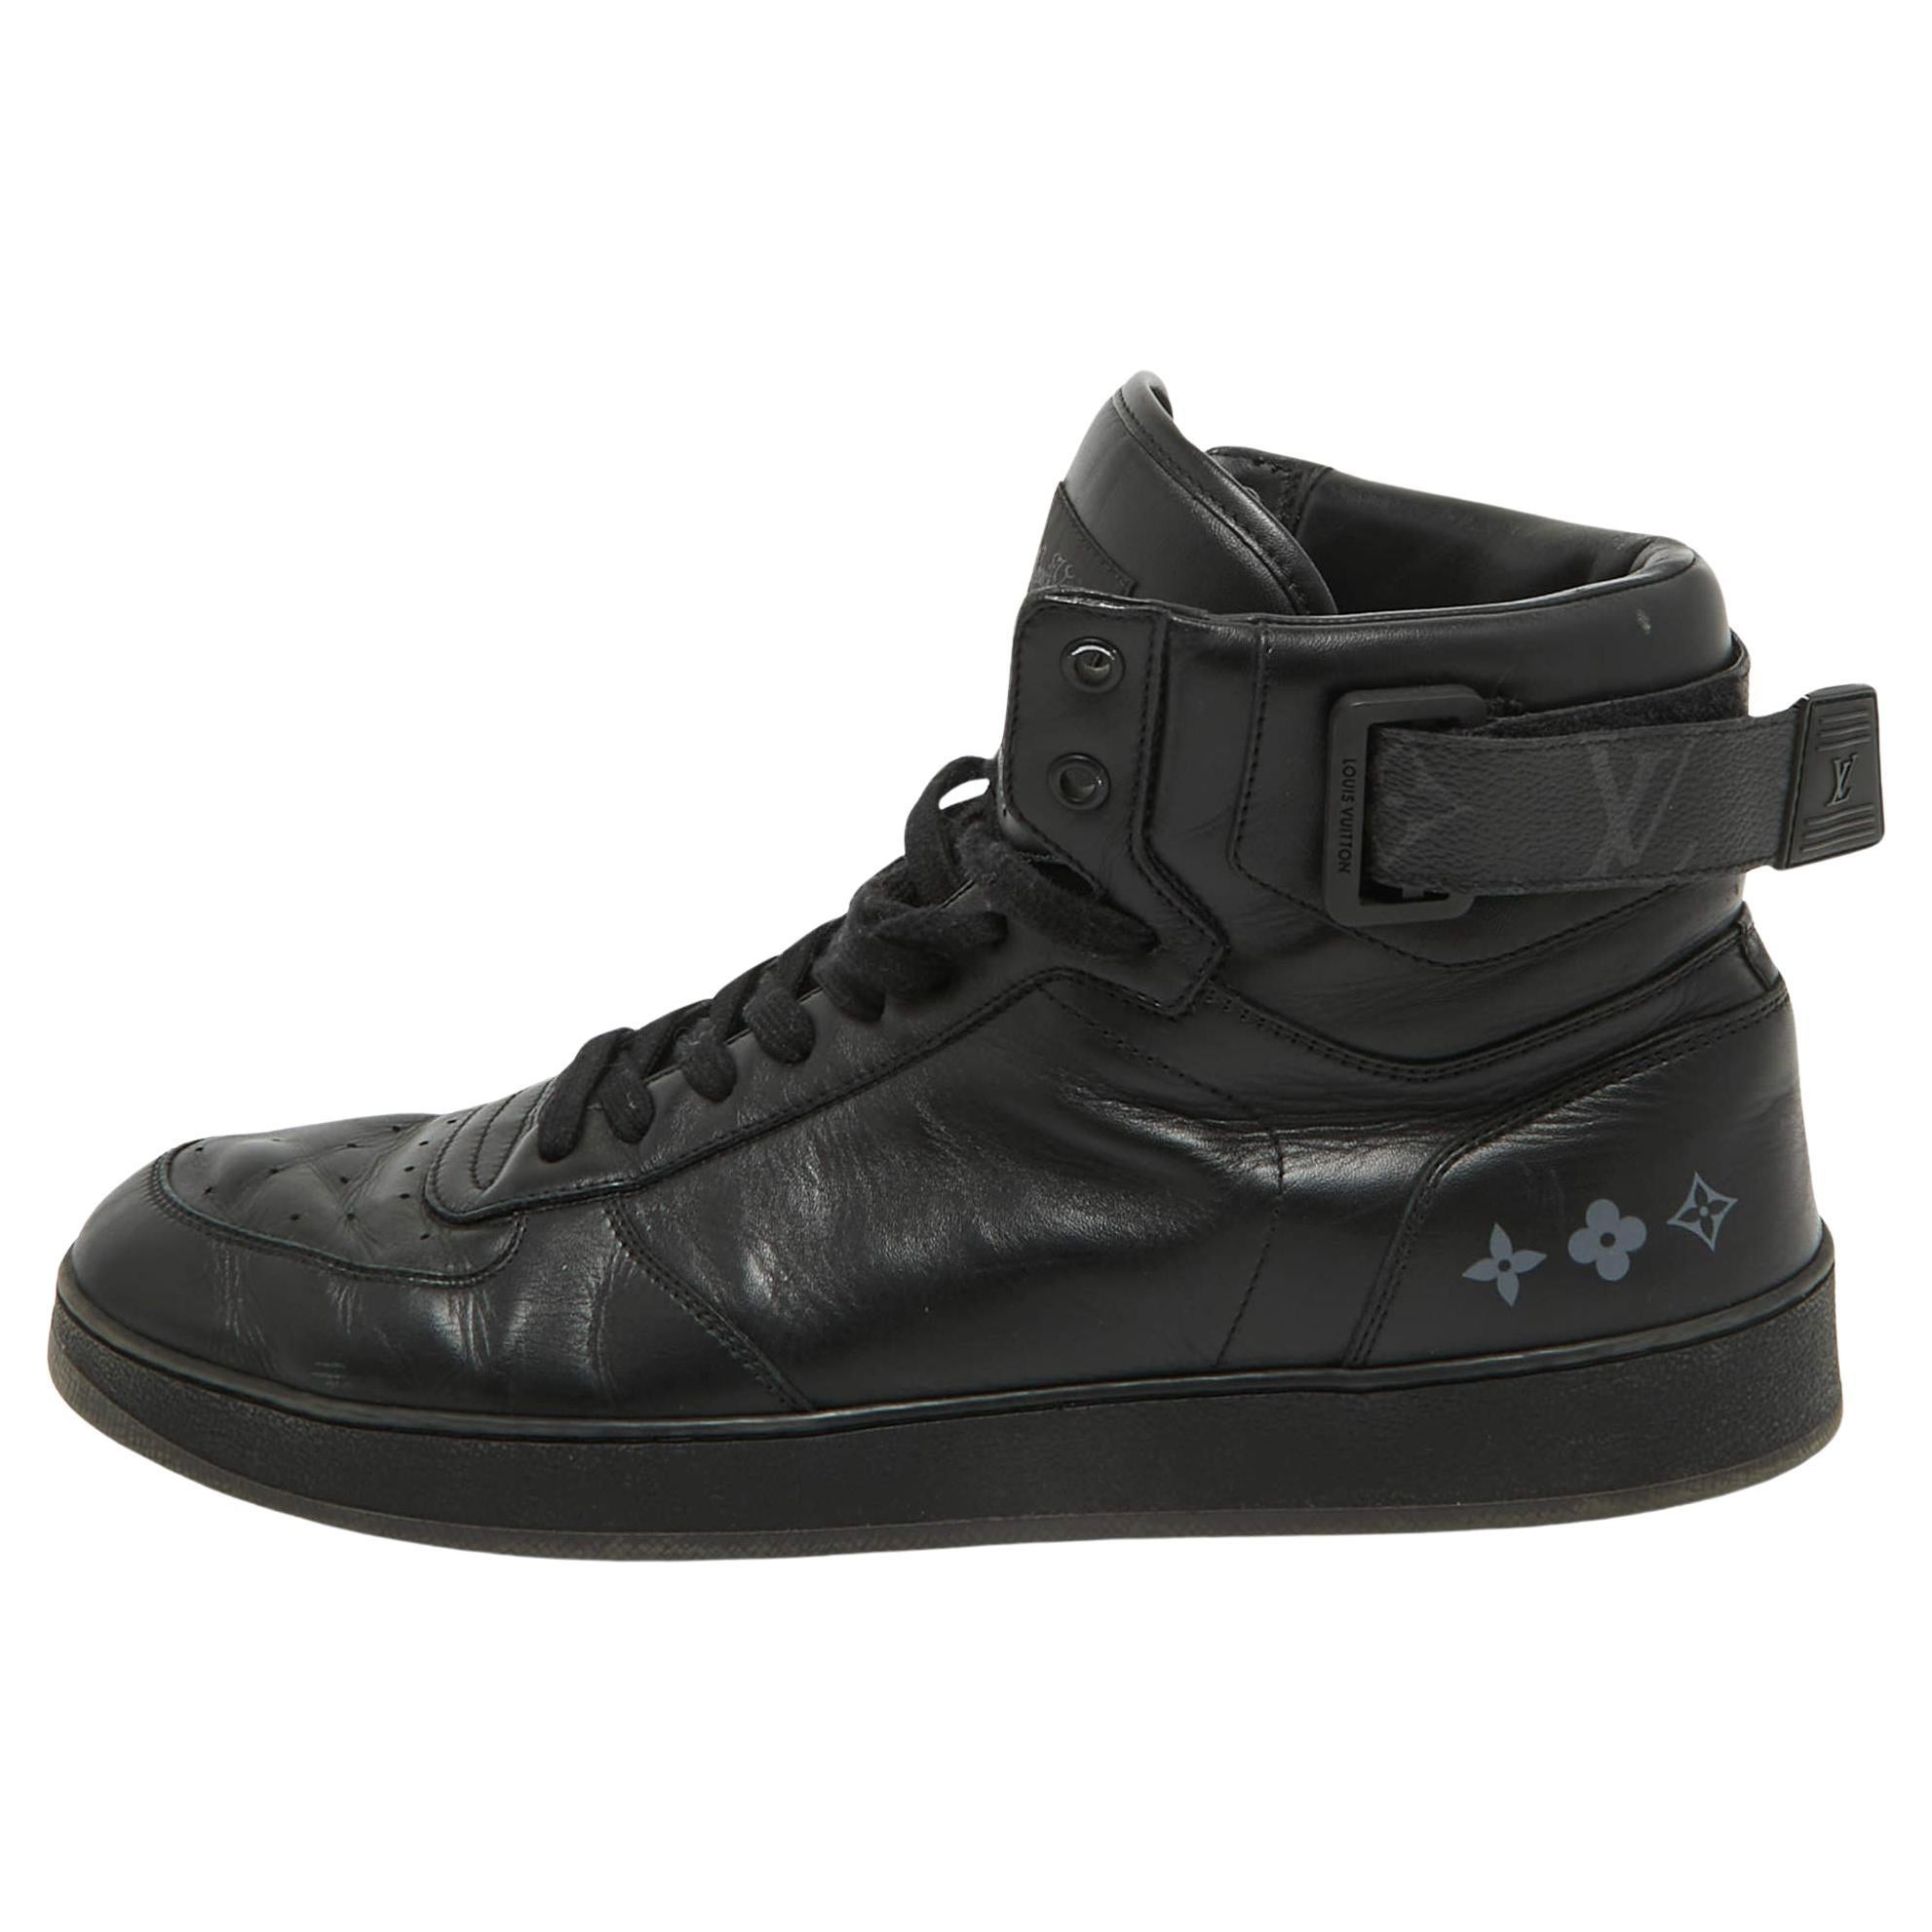 Louis Vuitton Black Leather Rivoli High Top Sneakers Size 43 For Sale